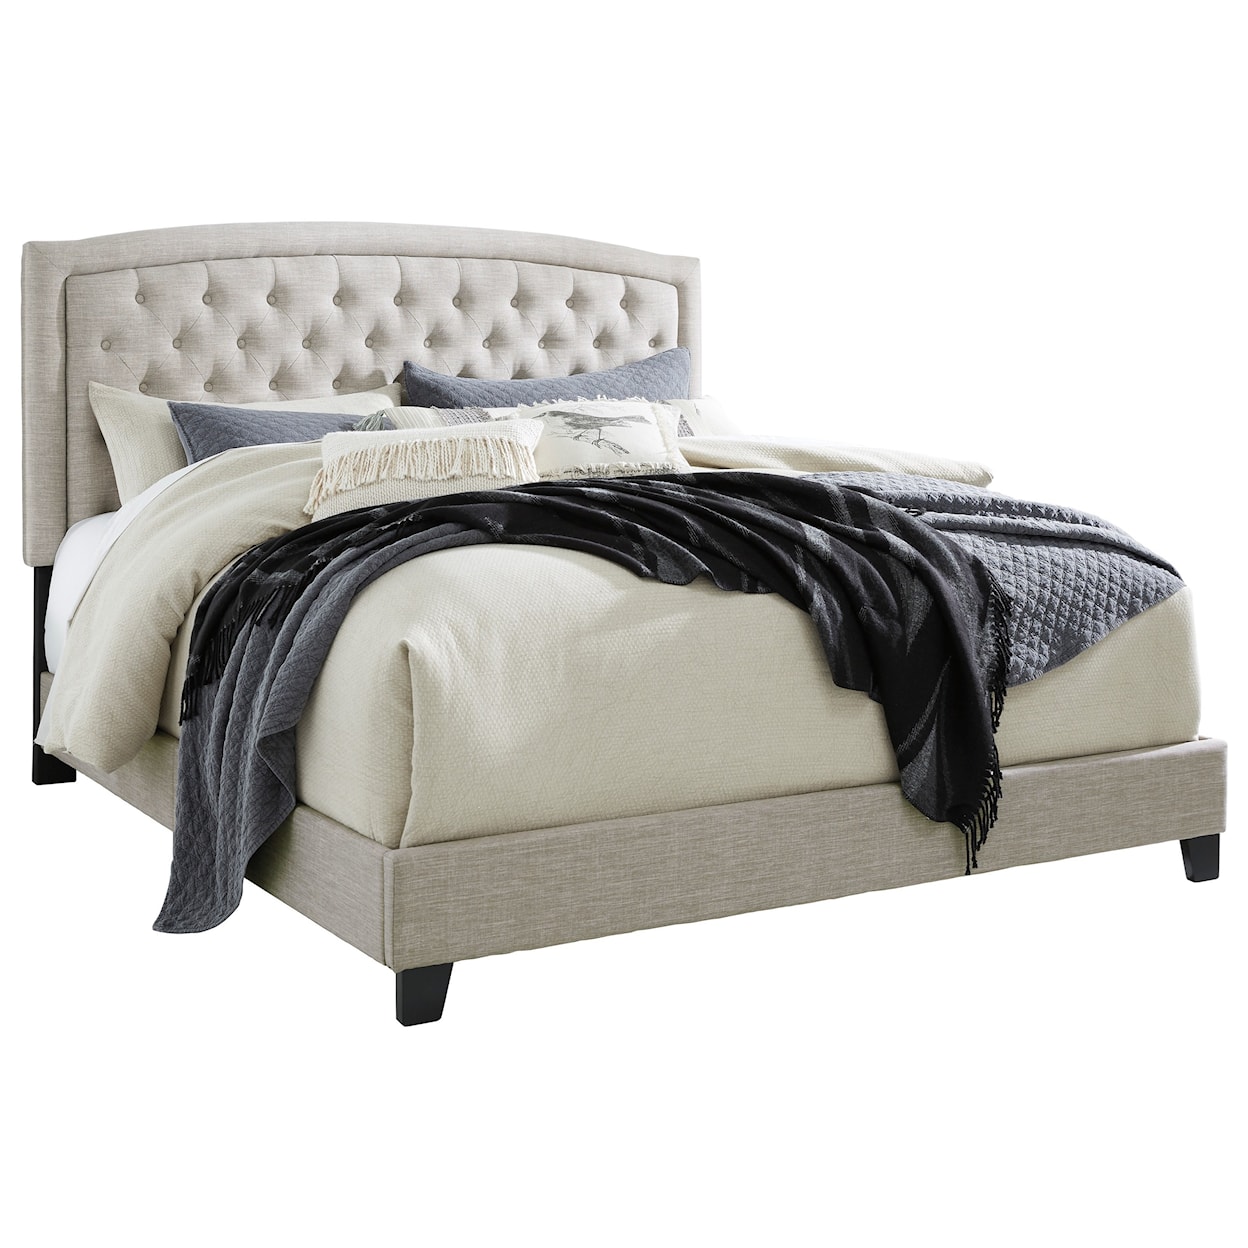 Signature Design by Ashley Jerary King Upholstered Bed